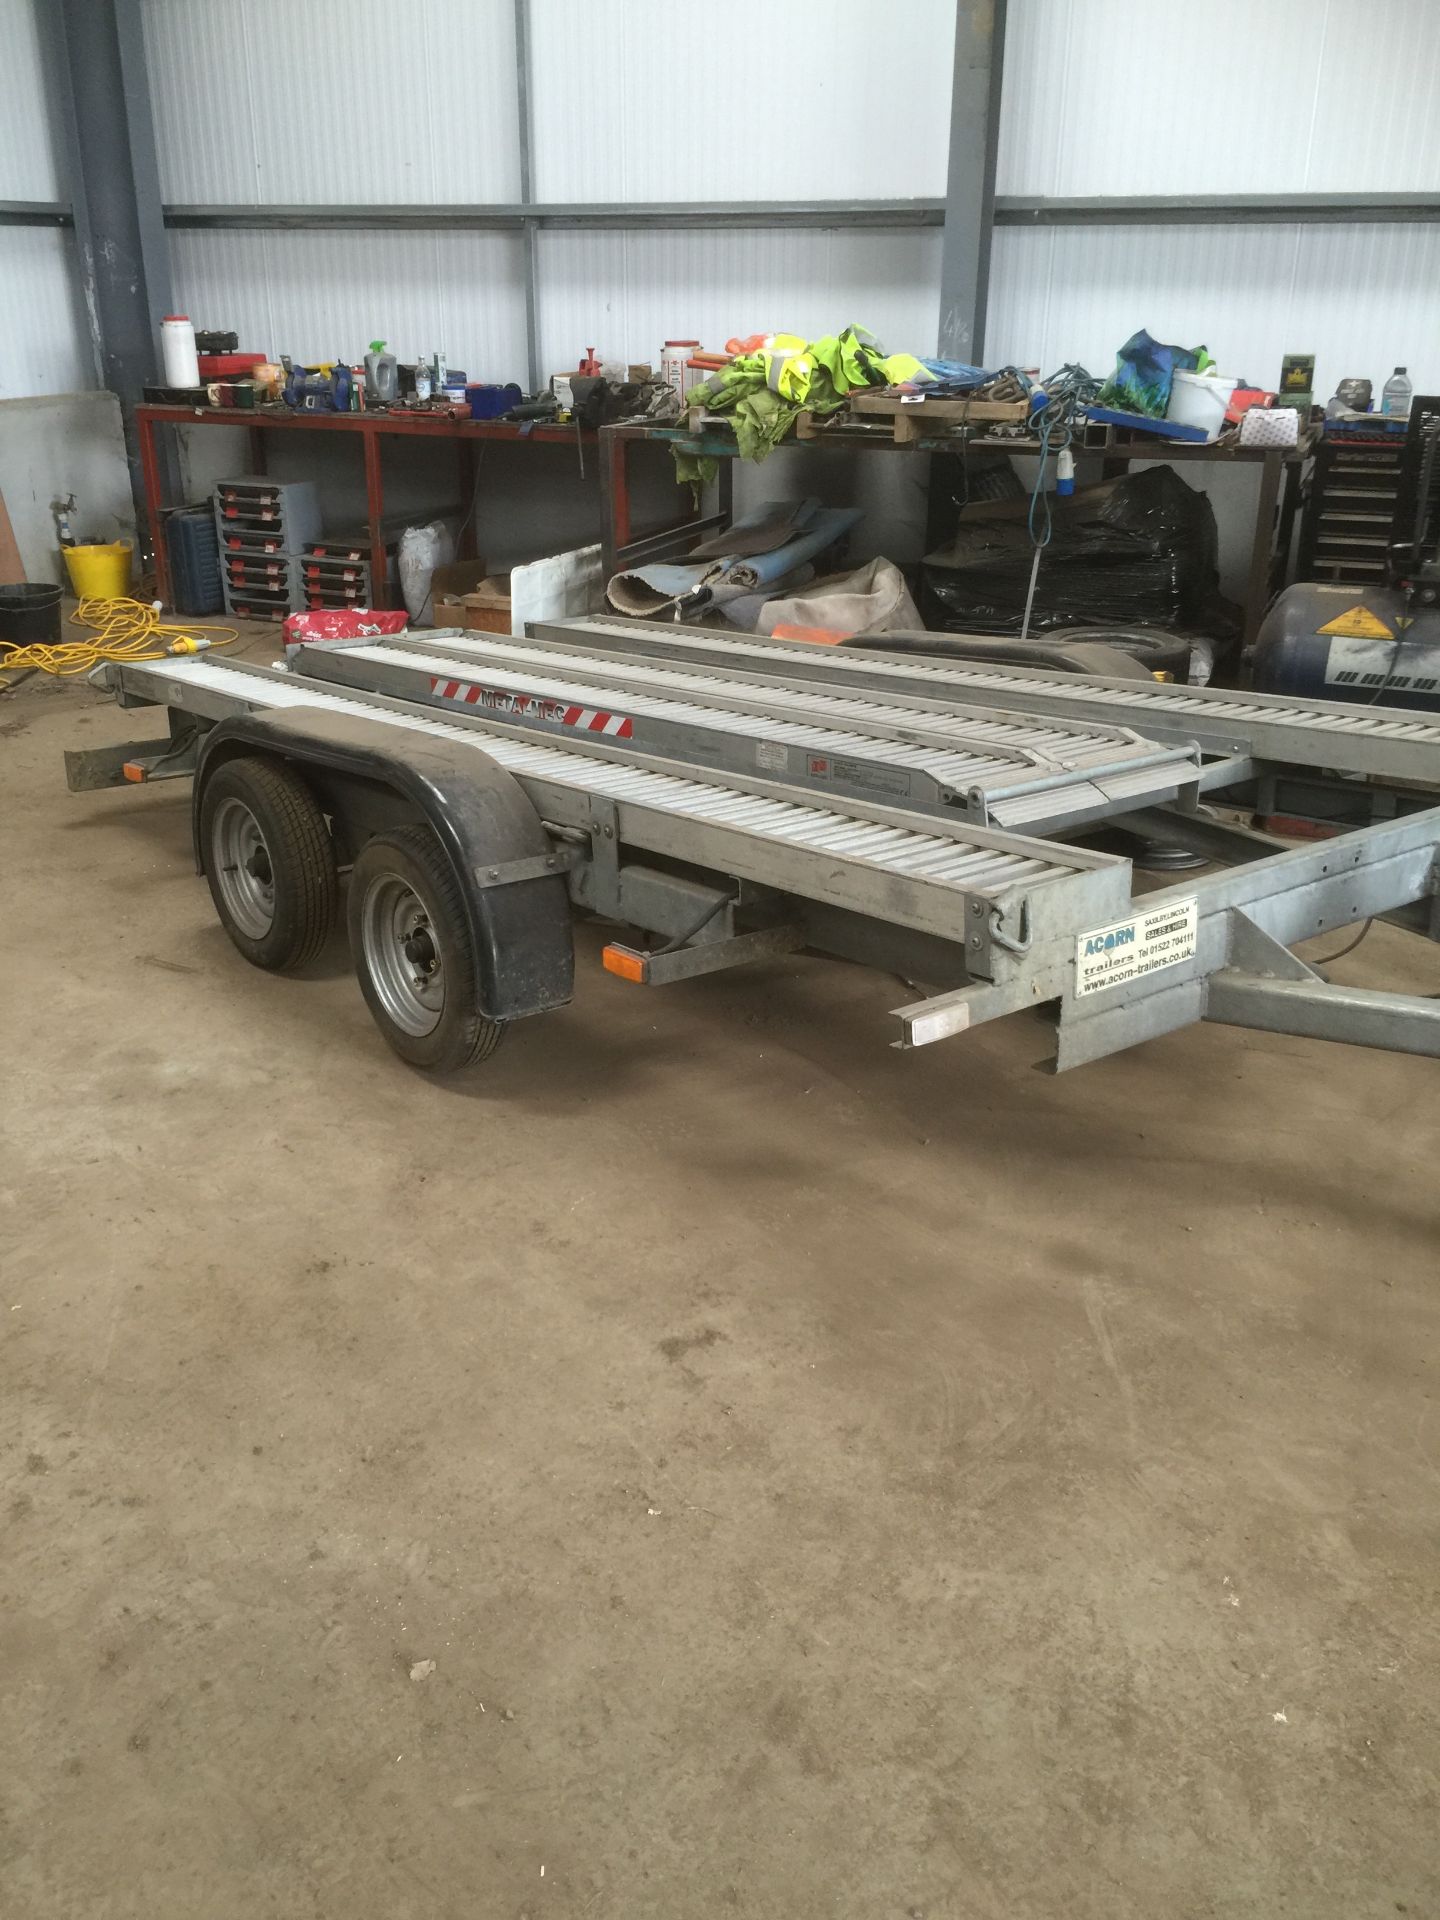 Twin Axel Car Trailer - Length - trailer bed 3.5m overall 4.8m - width - 2.01m - overall unladen - Image 2 of 6